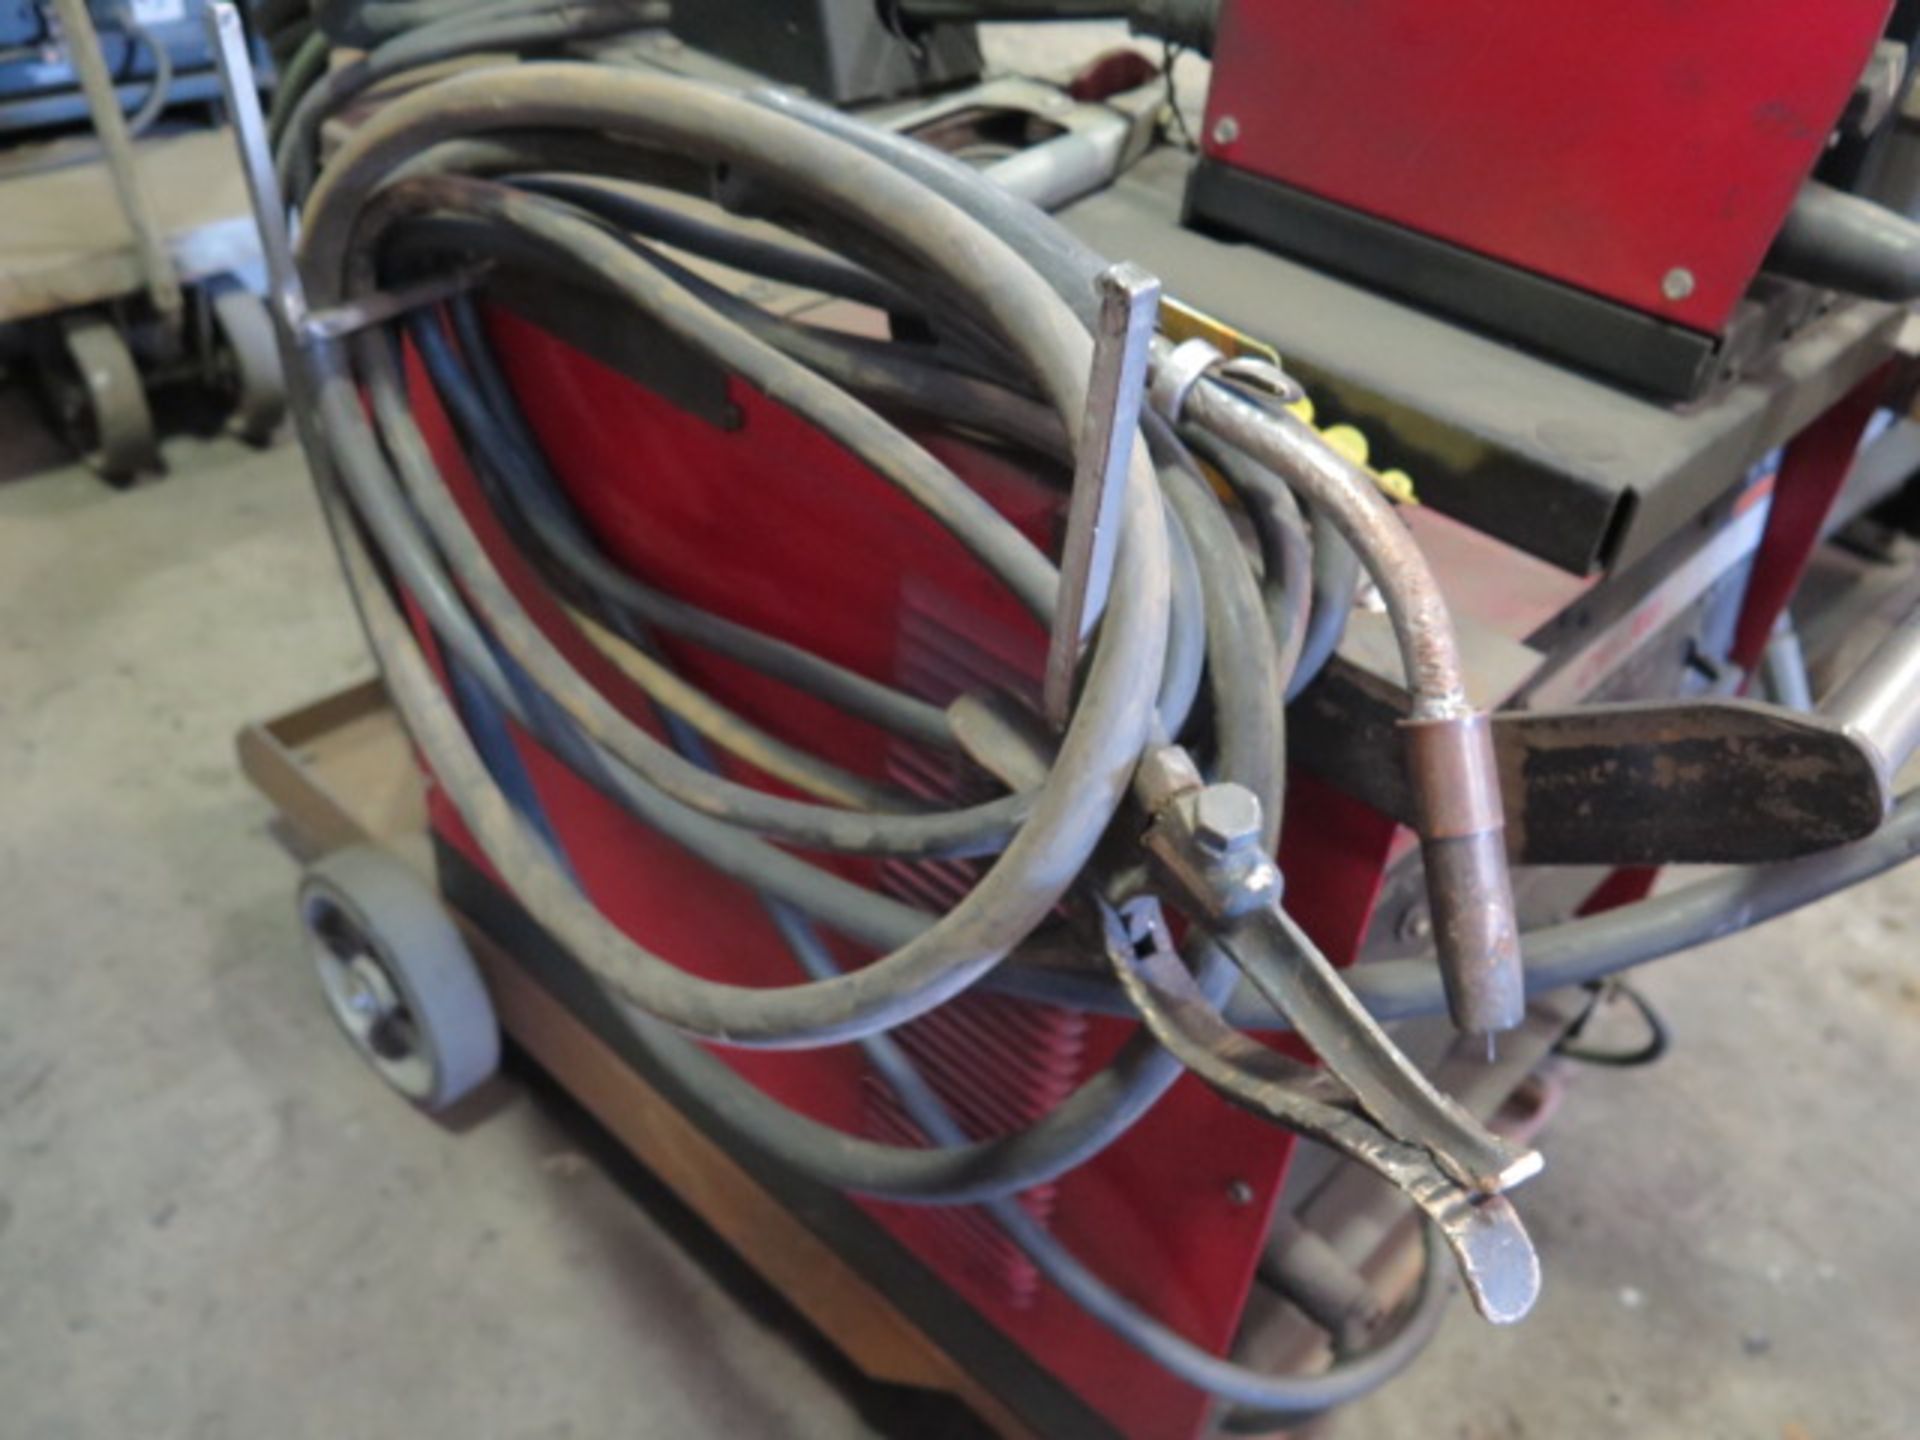 Lincoln CV-300 Arc Welding Power Source w/ Lincoln LN-7 Wire Feed (SOLD AS-IS - NO WARRANTY) - Image 10 of 12